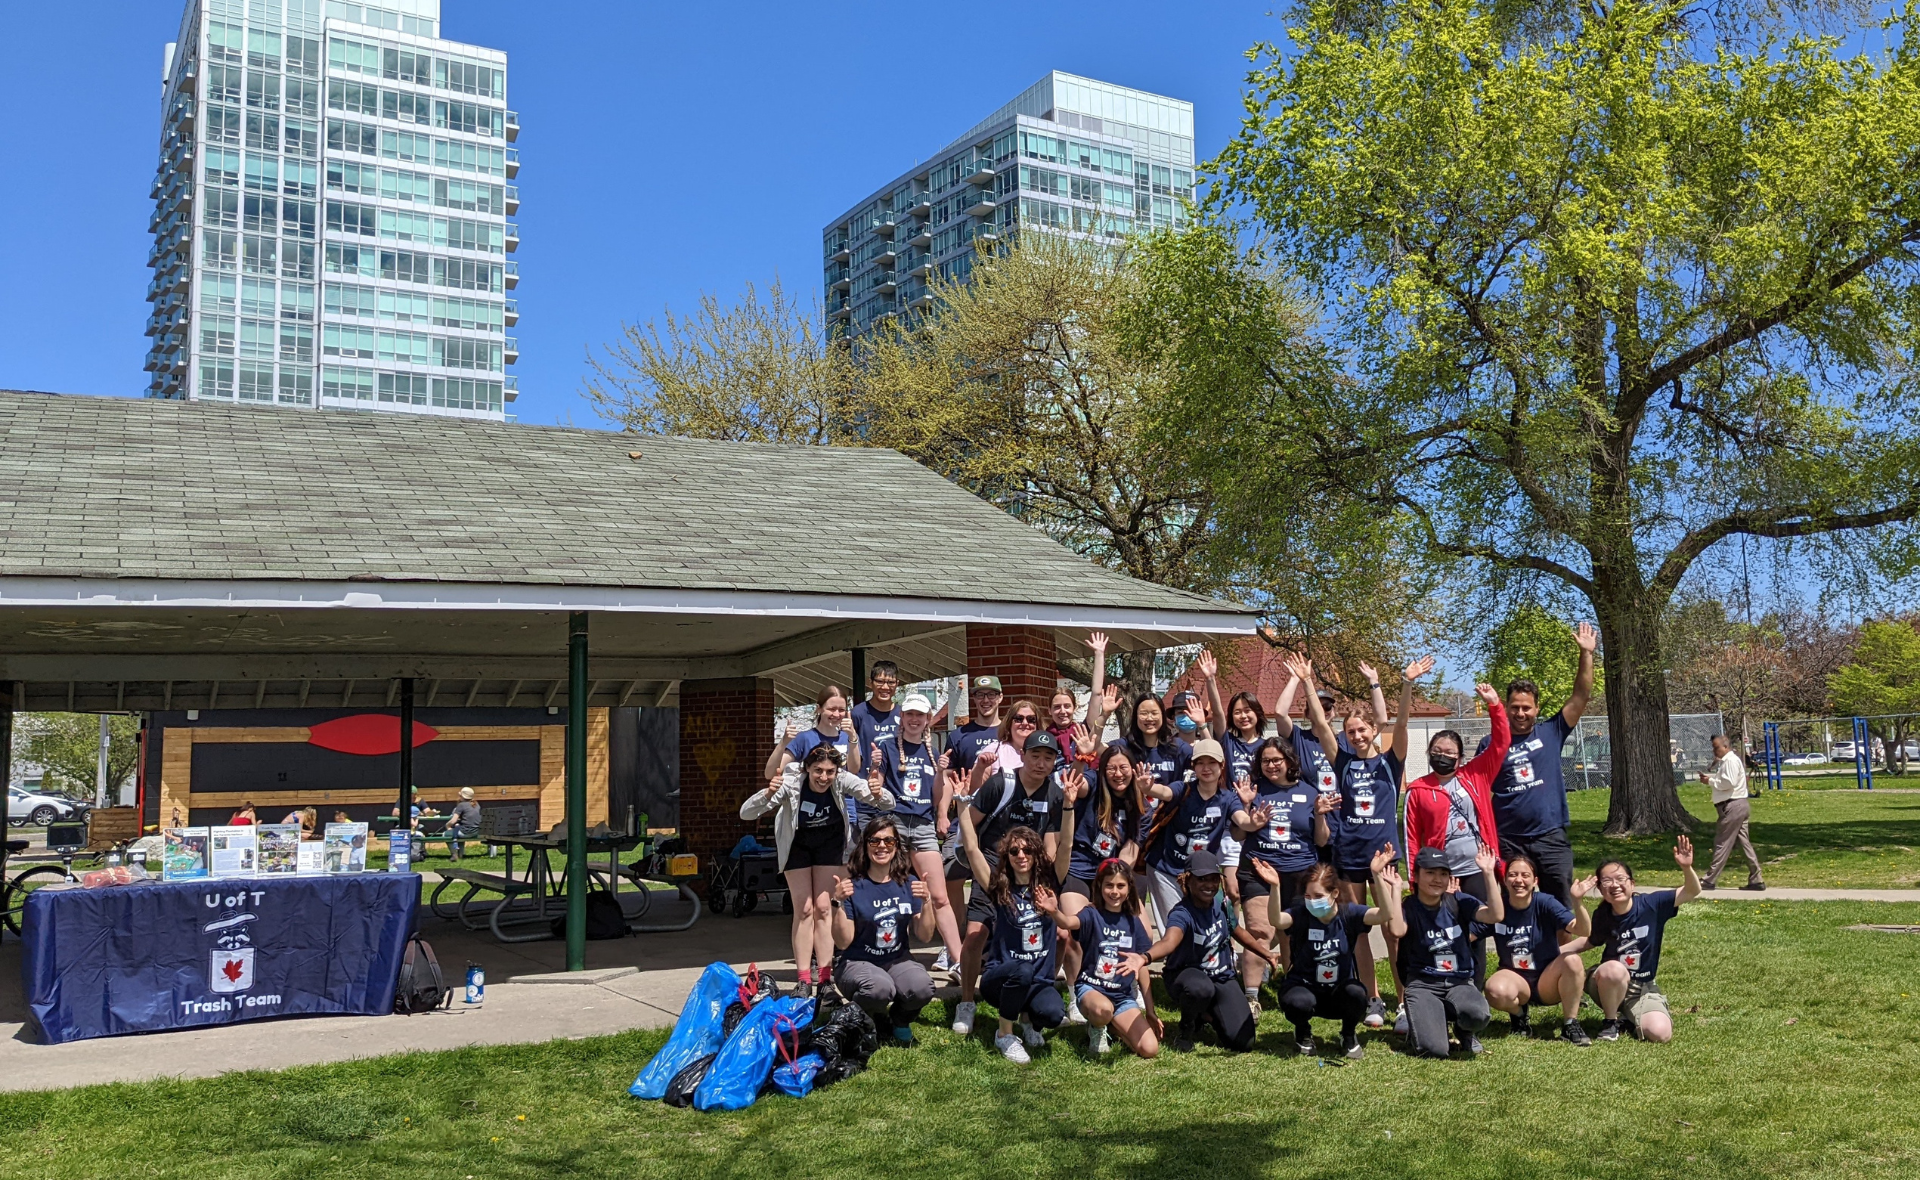 A picture of the University of Toronto Trash Team and its volunteers at a clean up.